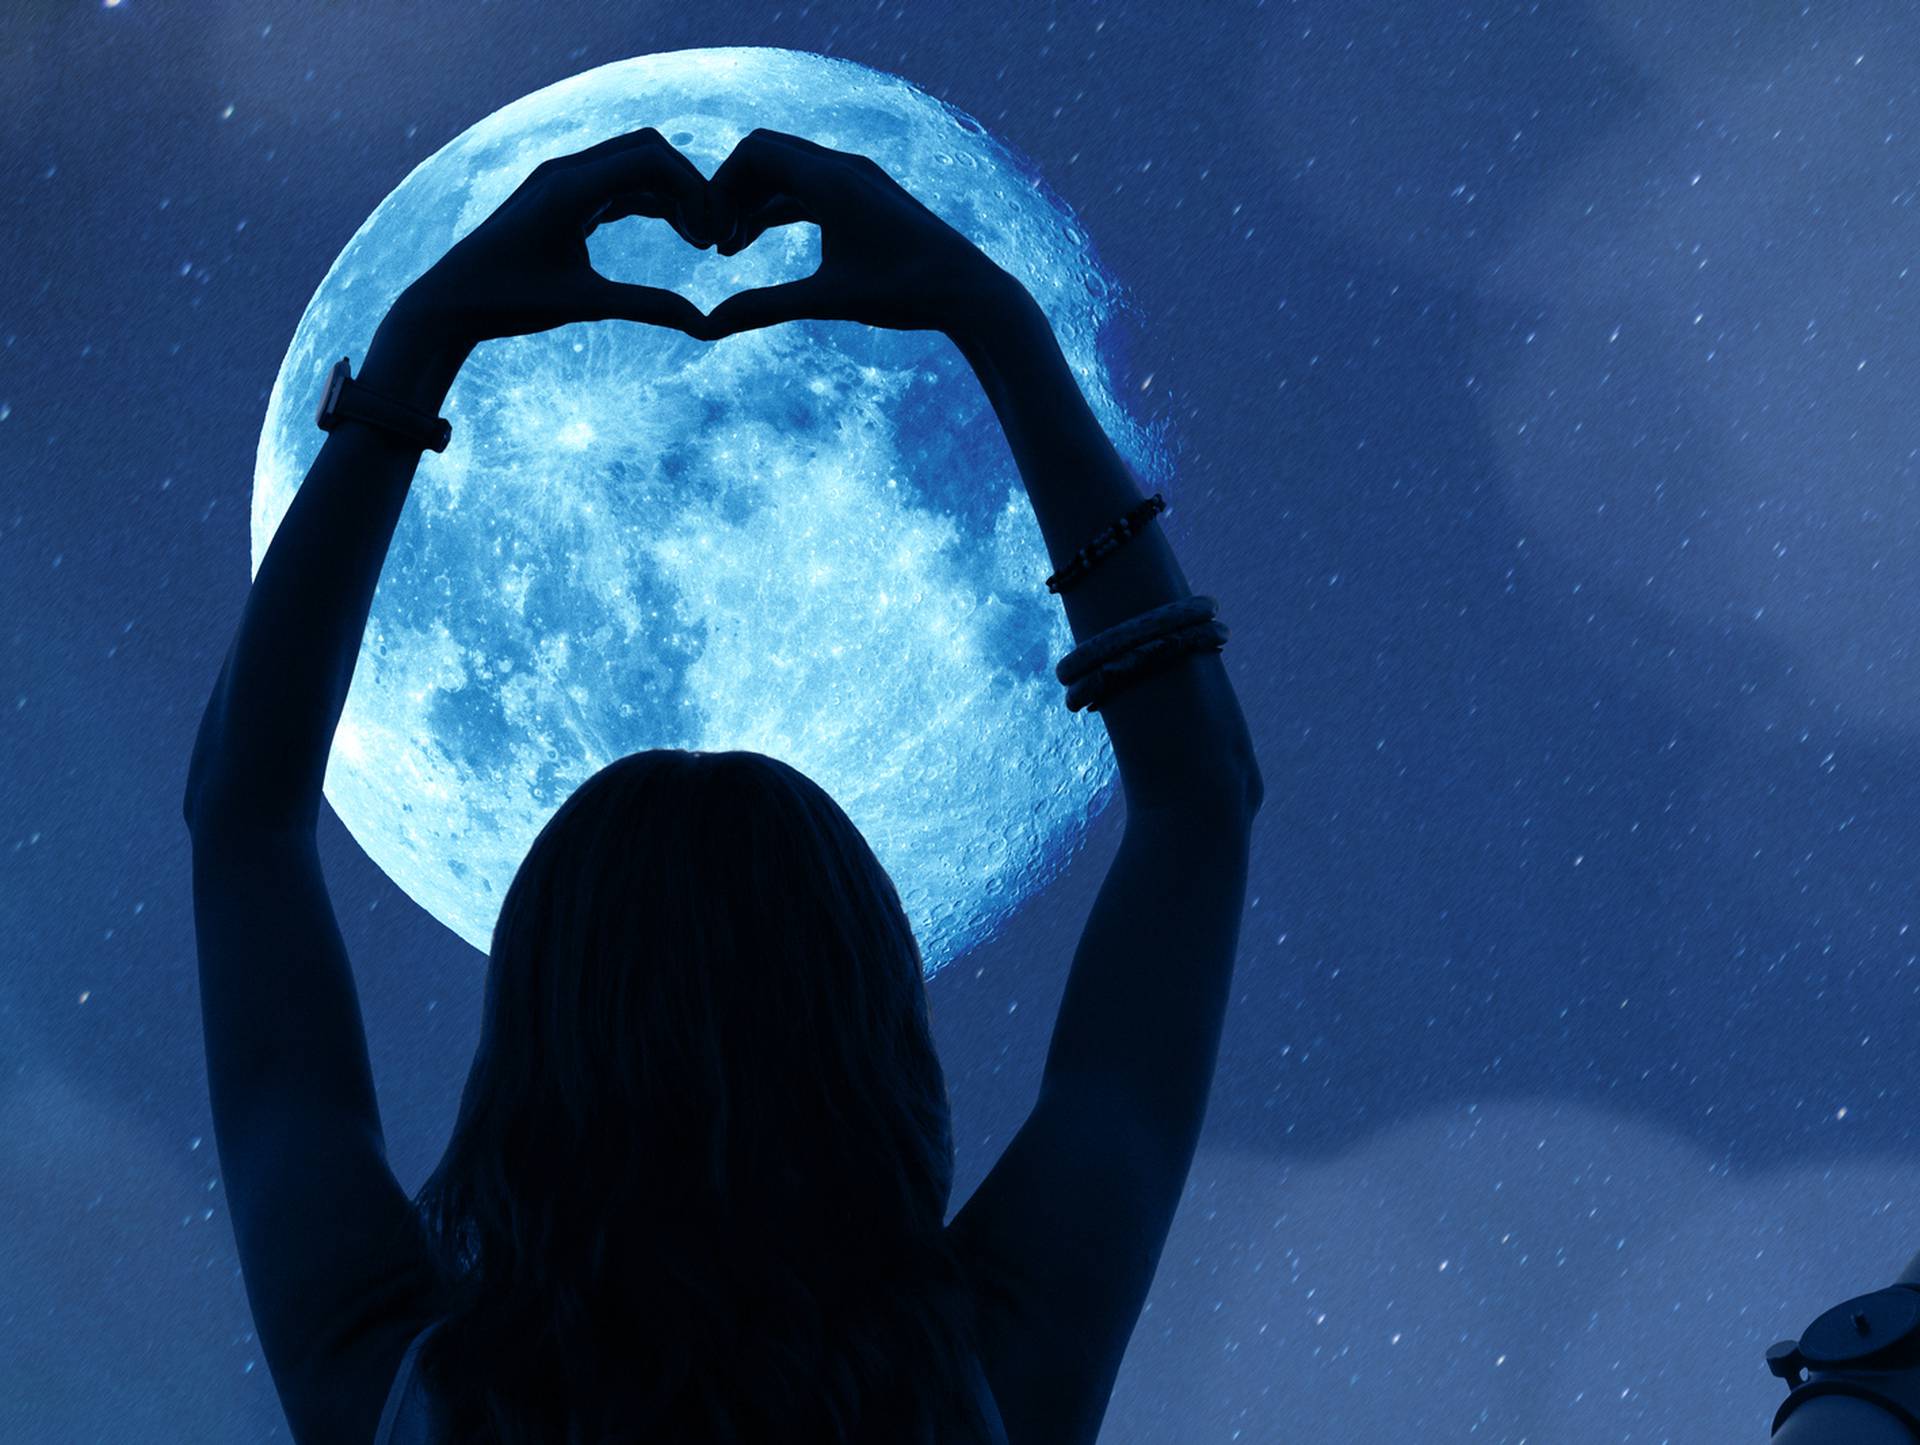 Girl holding a heart - shape with telescope, Moon and stars. My astronomy work.